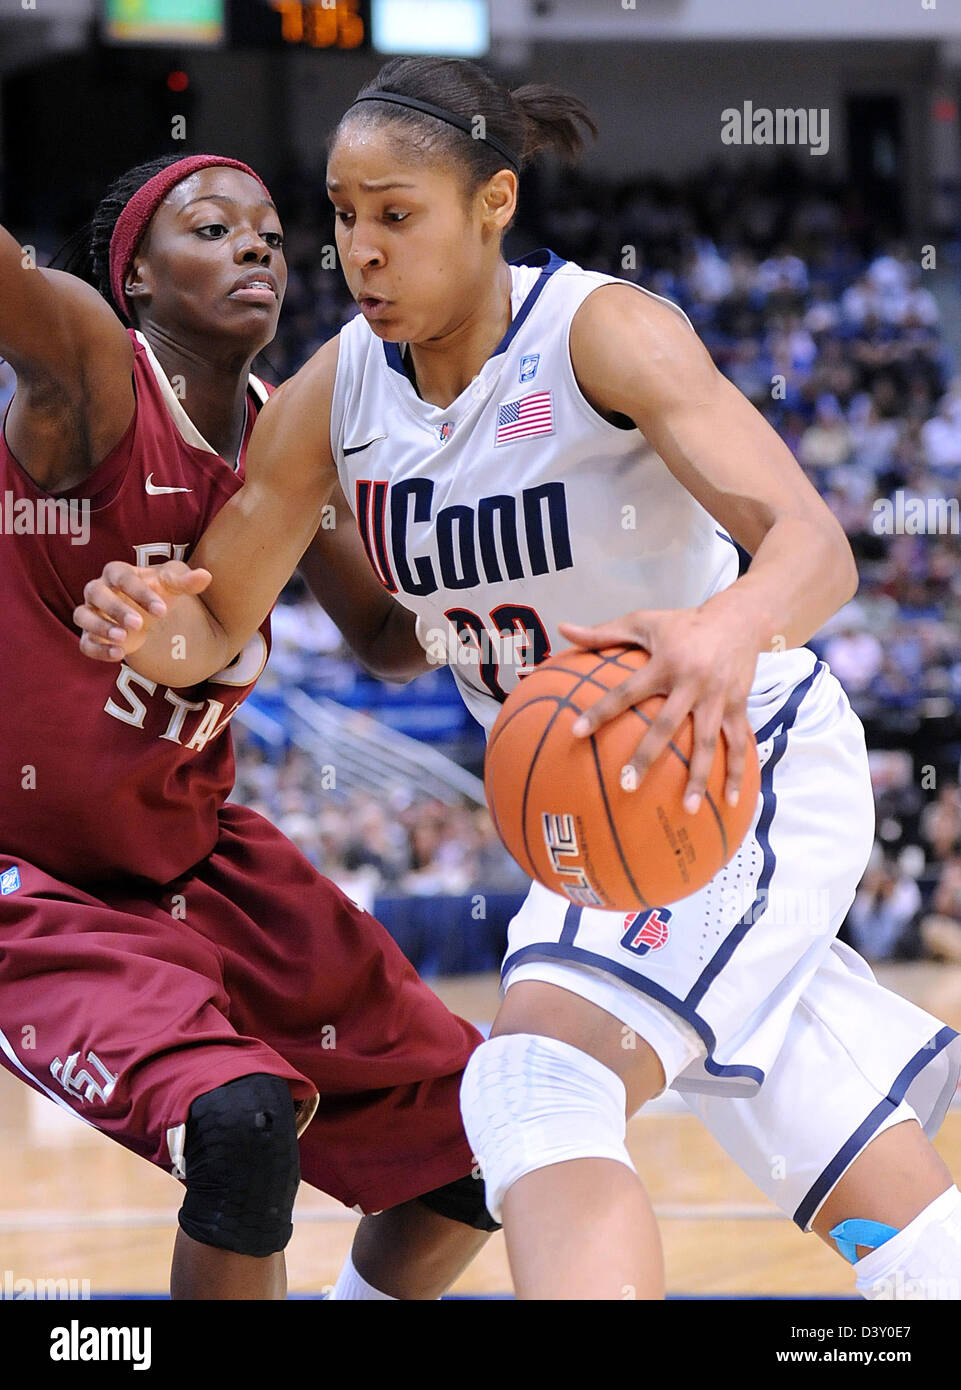 Hartford CT USA- UCONN's Maya Moore drives past Florida State's Christian Hunnicutt during the first half. Women's Basketball Stock Photo